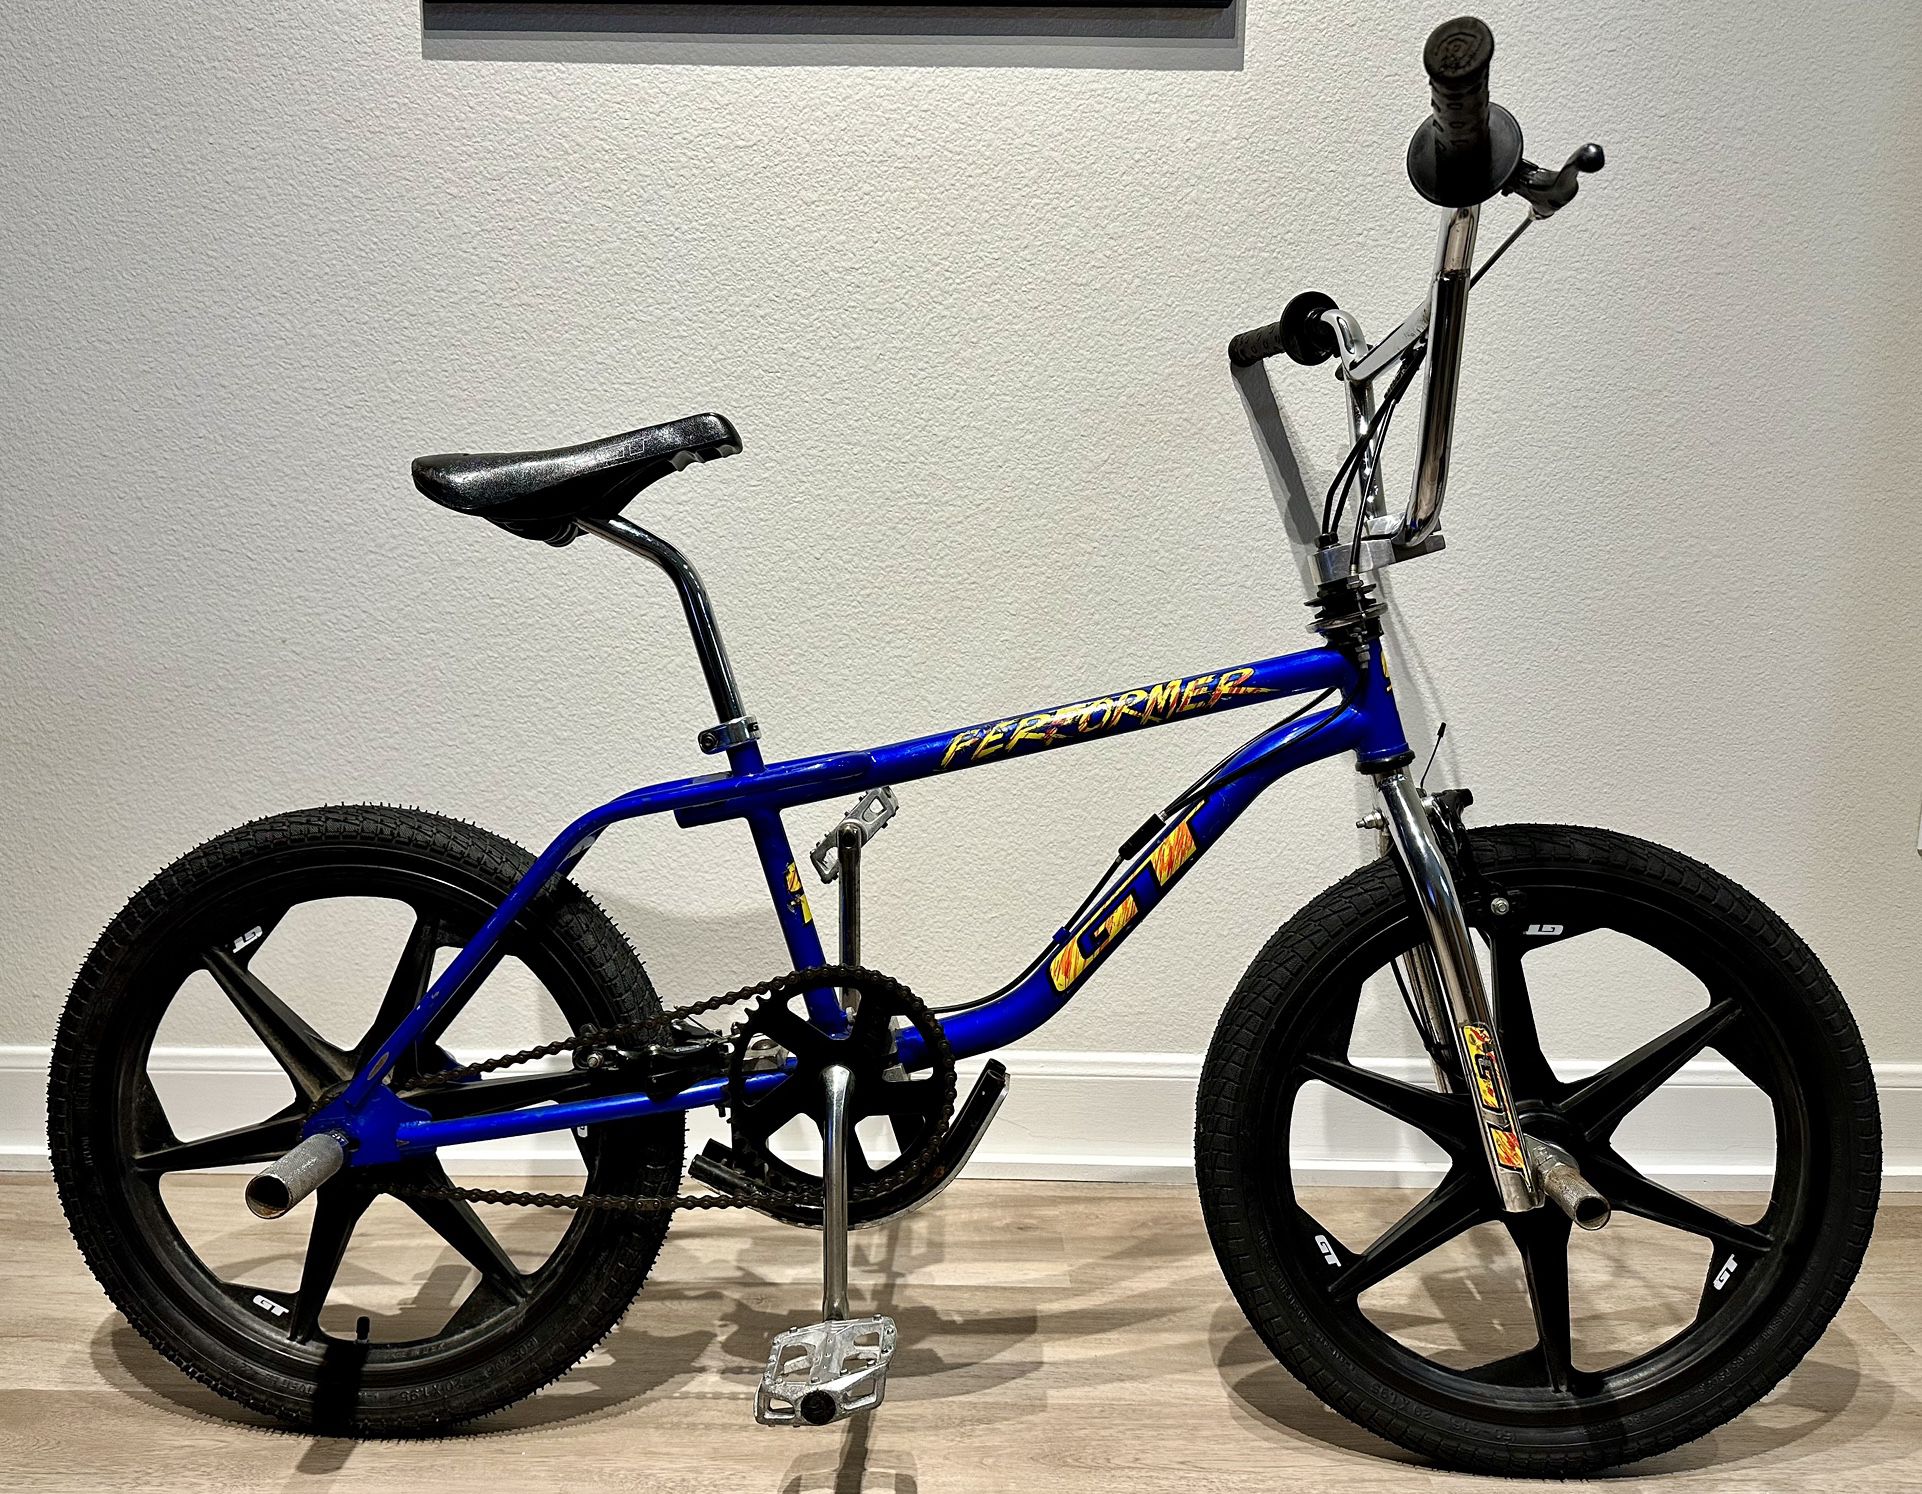 1993 GT Performer Freestyle/BMX True Survivor Bike with GT Tomahawk Mag Wheels and Bash Guard 